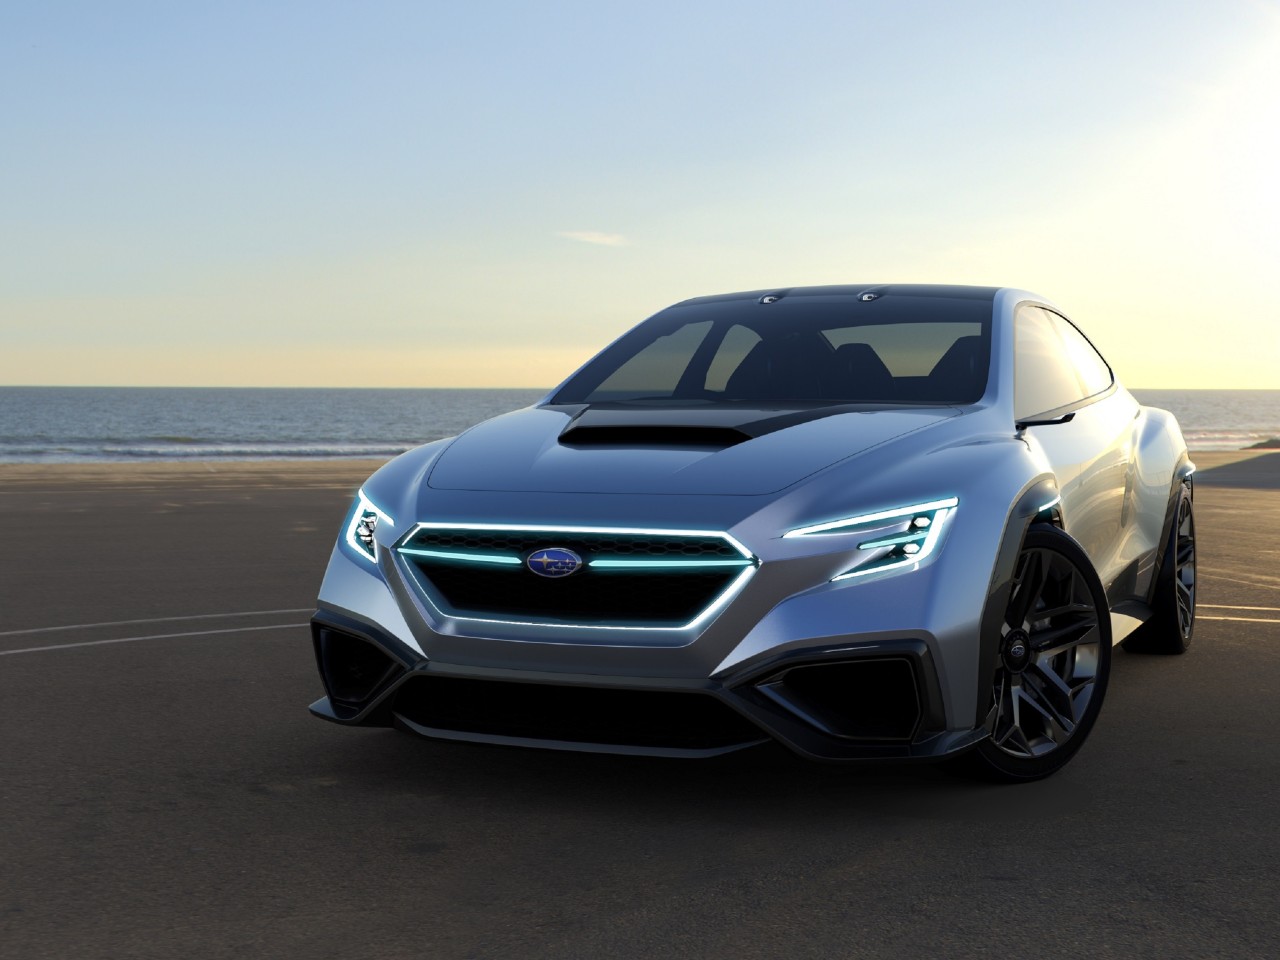 The Subaru VIZIV Performance Concept. Images are free for editorial use.